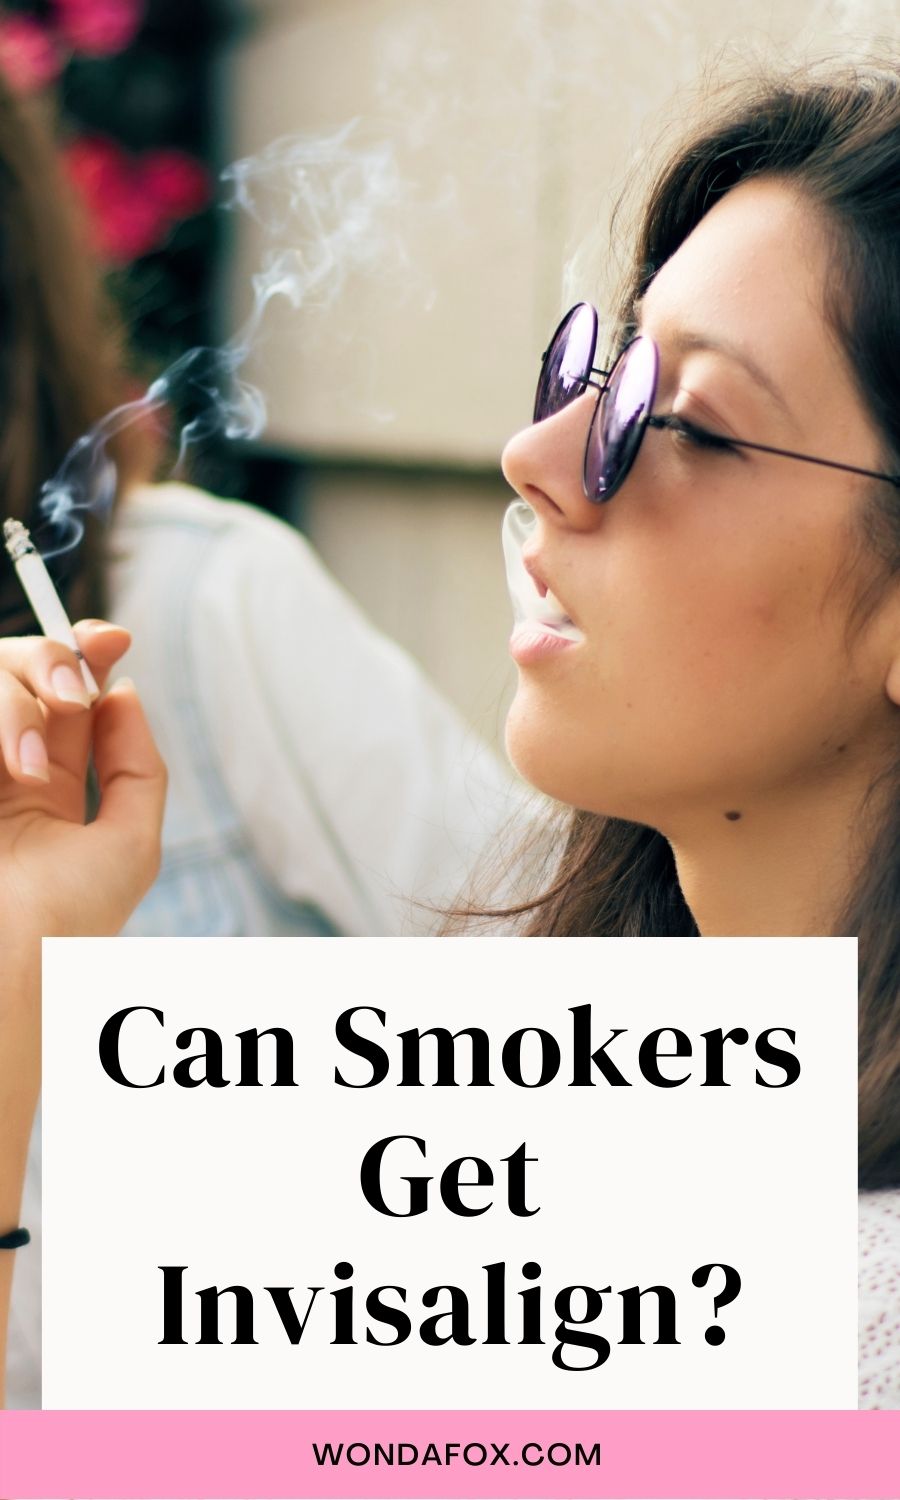 Can Smokers Get Invisalign?